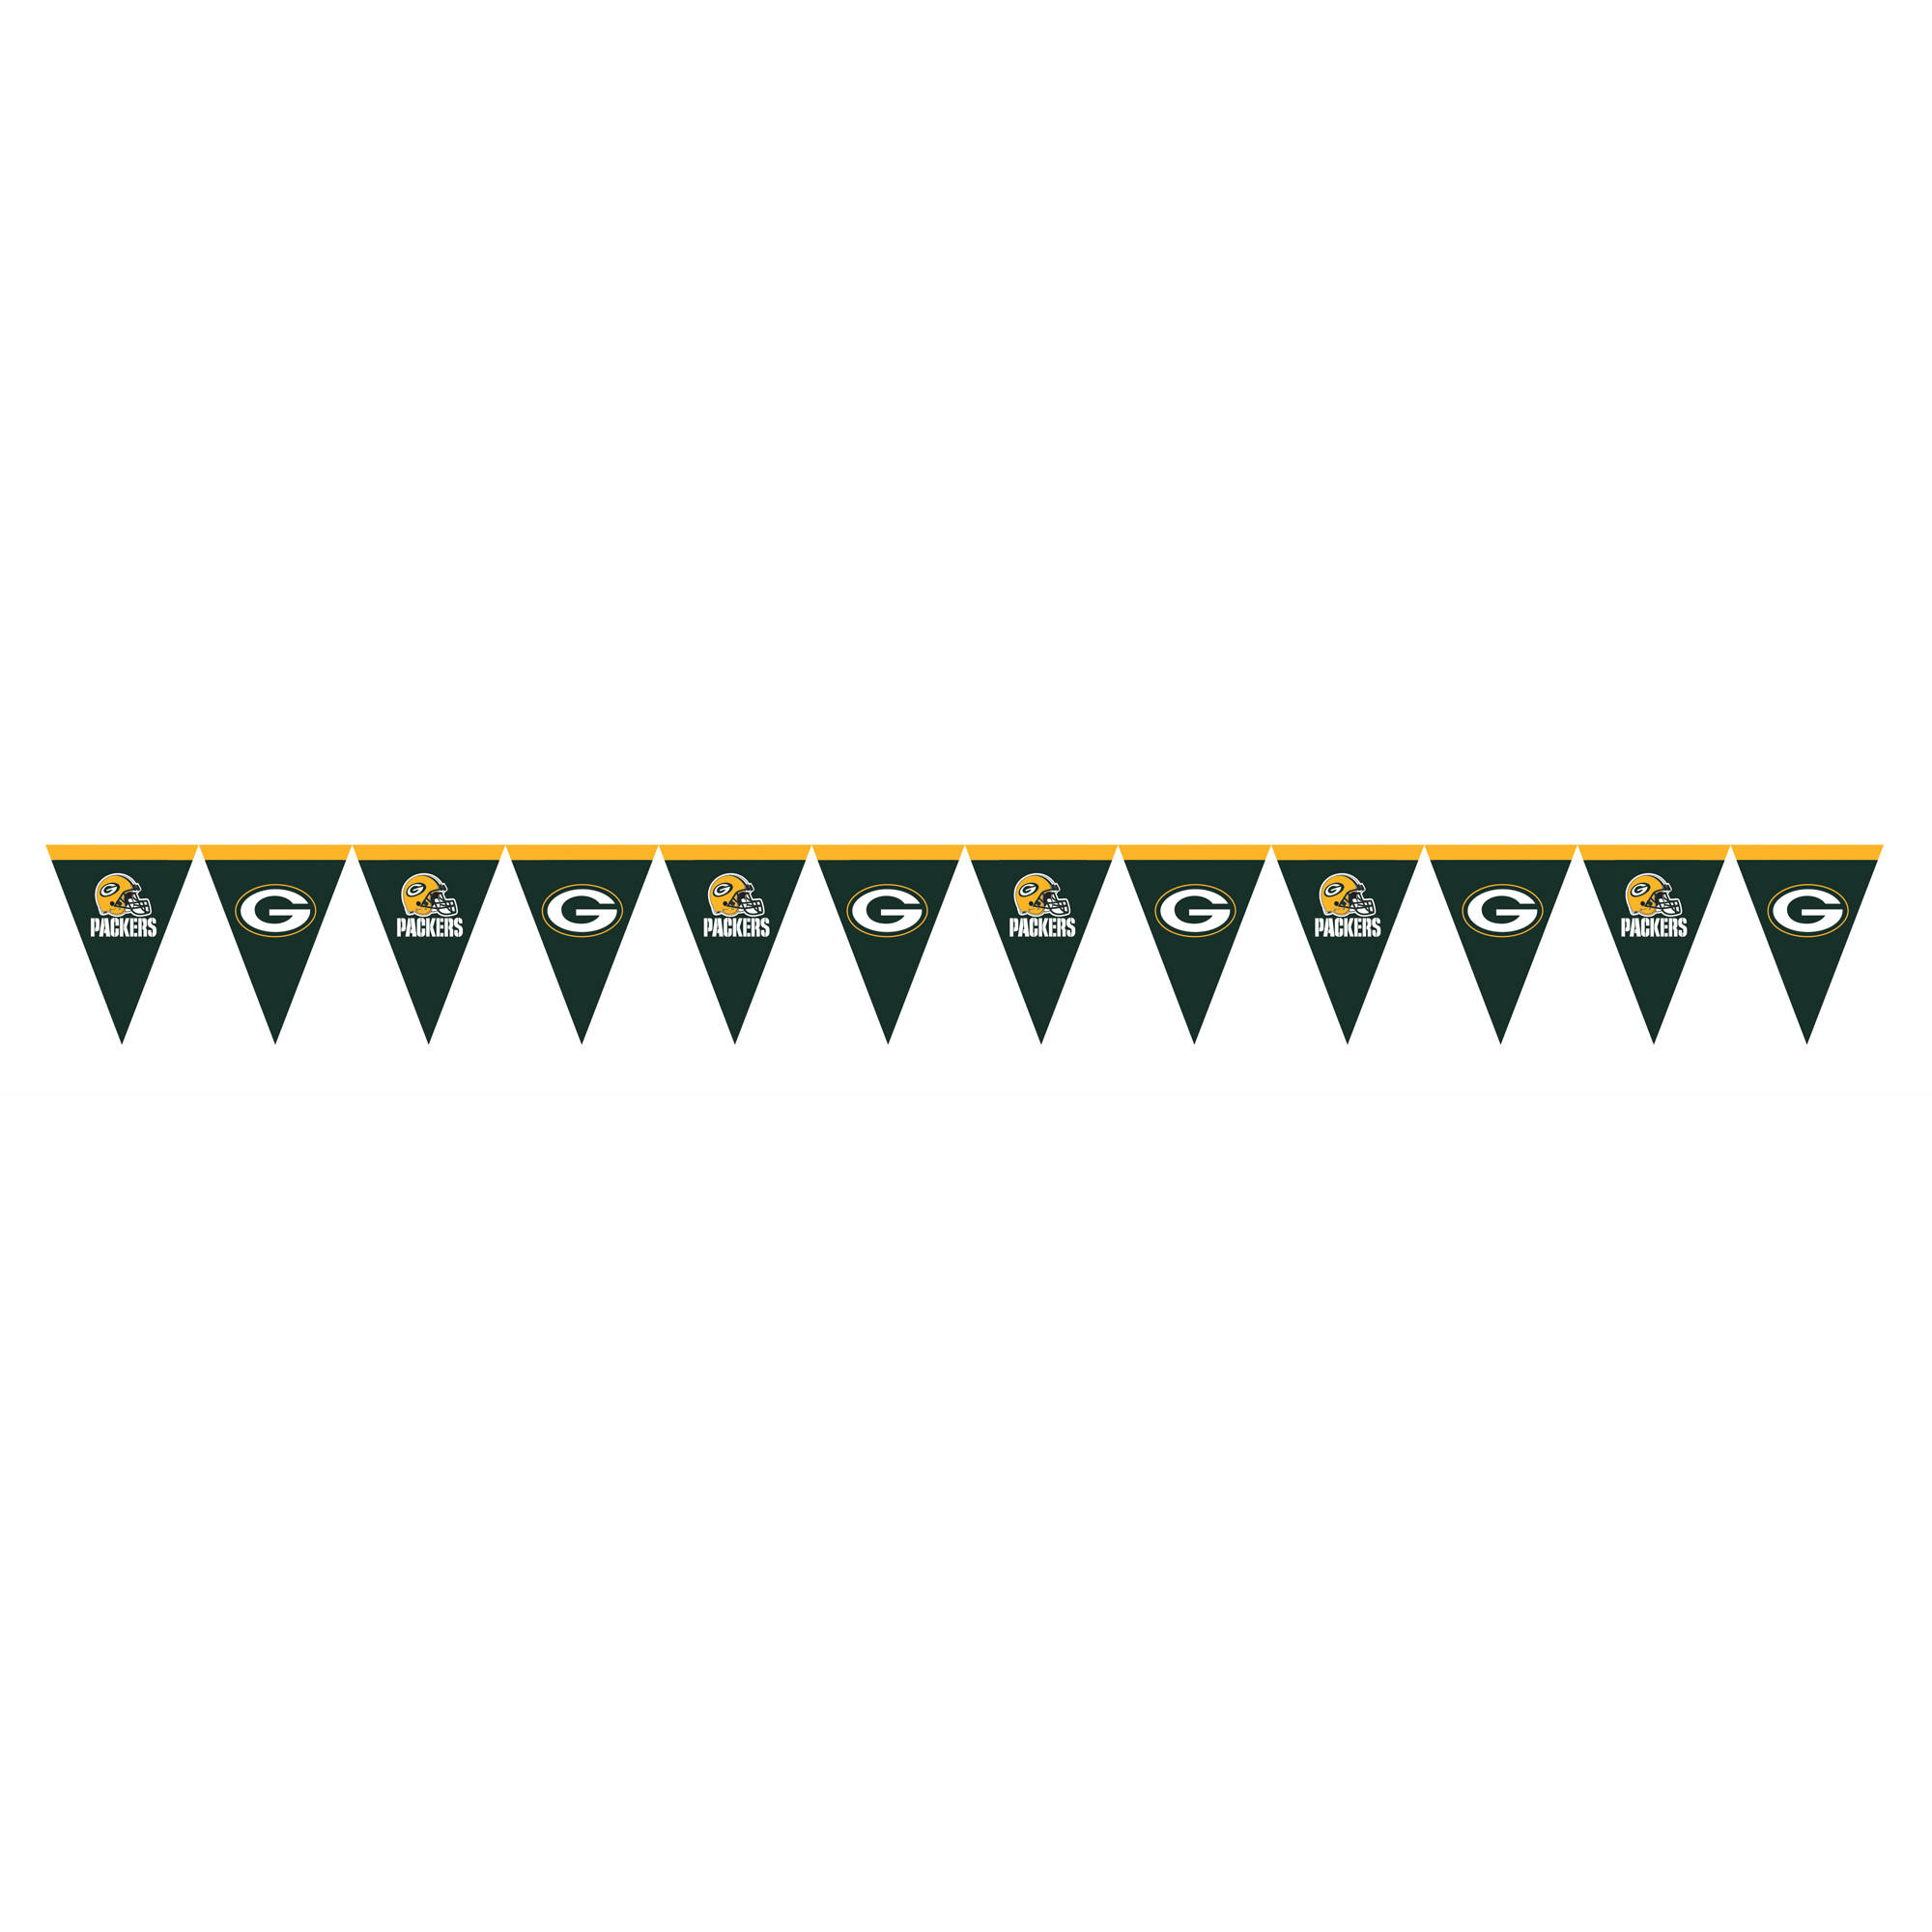 Green Bay Packers Flag Banner - image 1 of 1